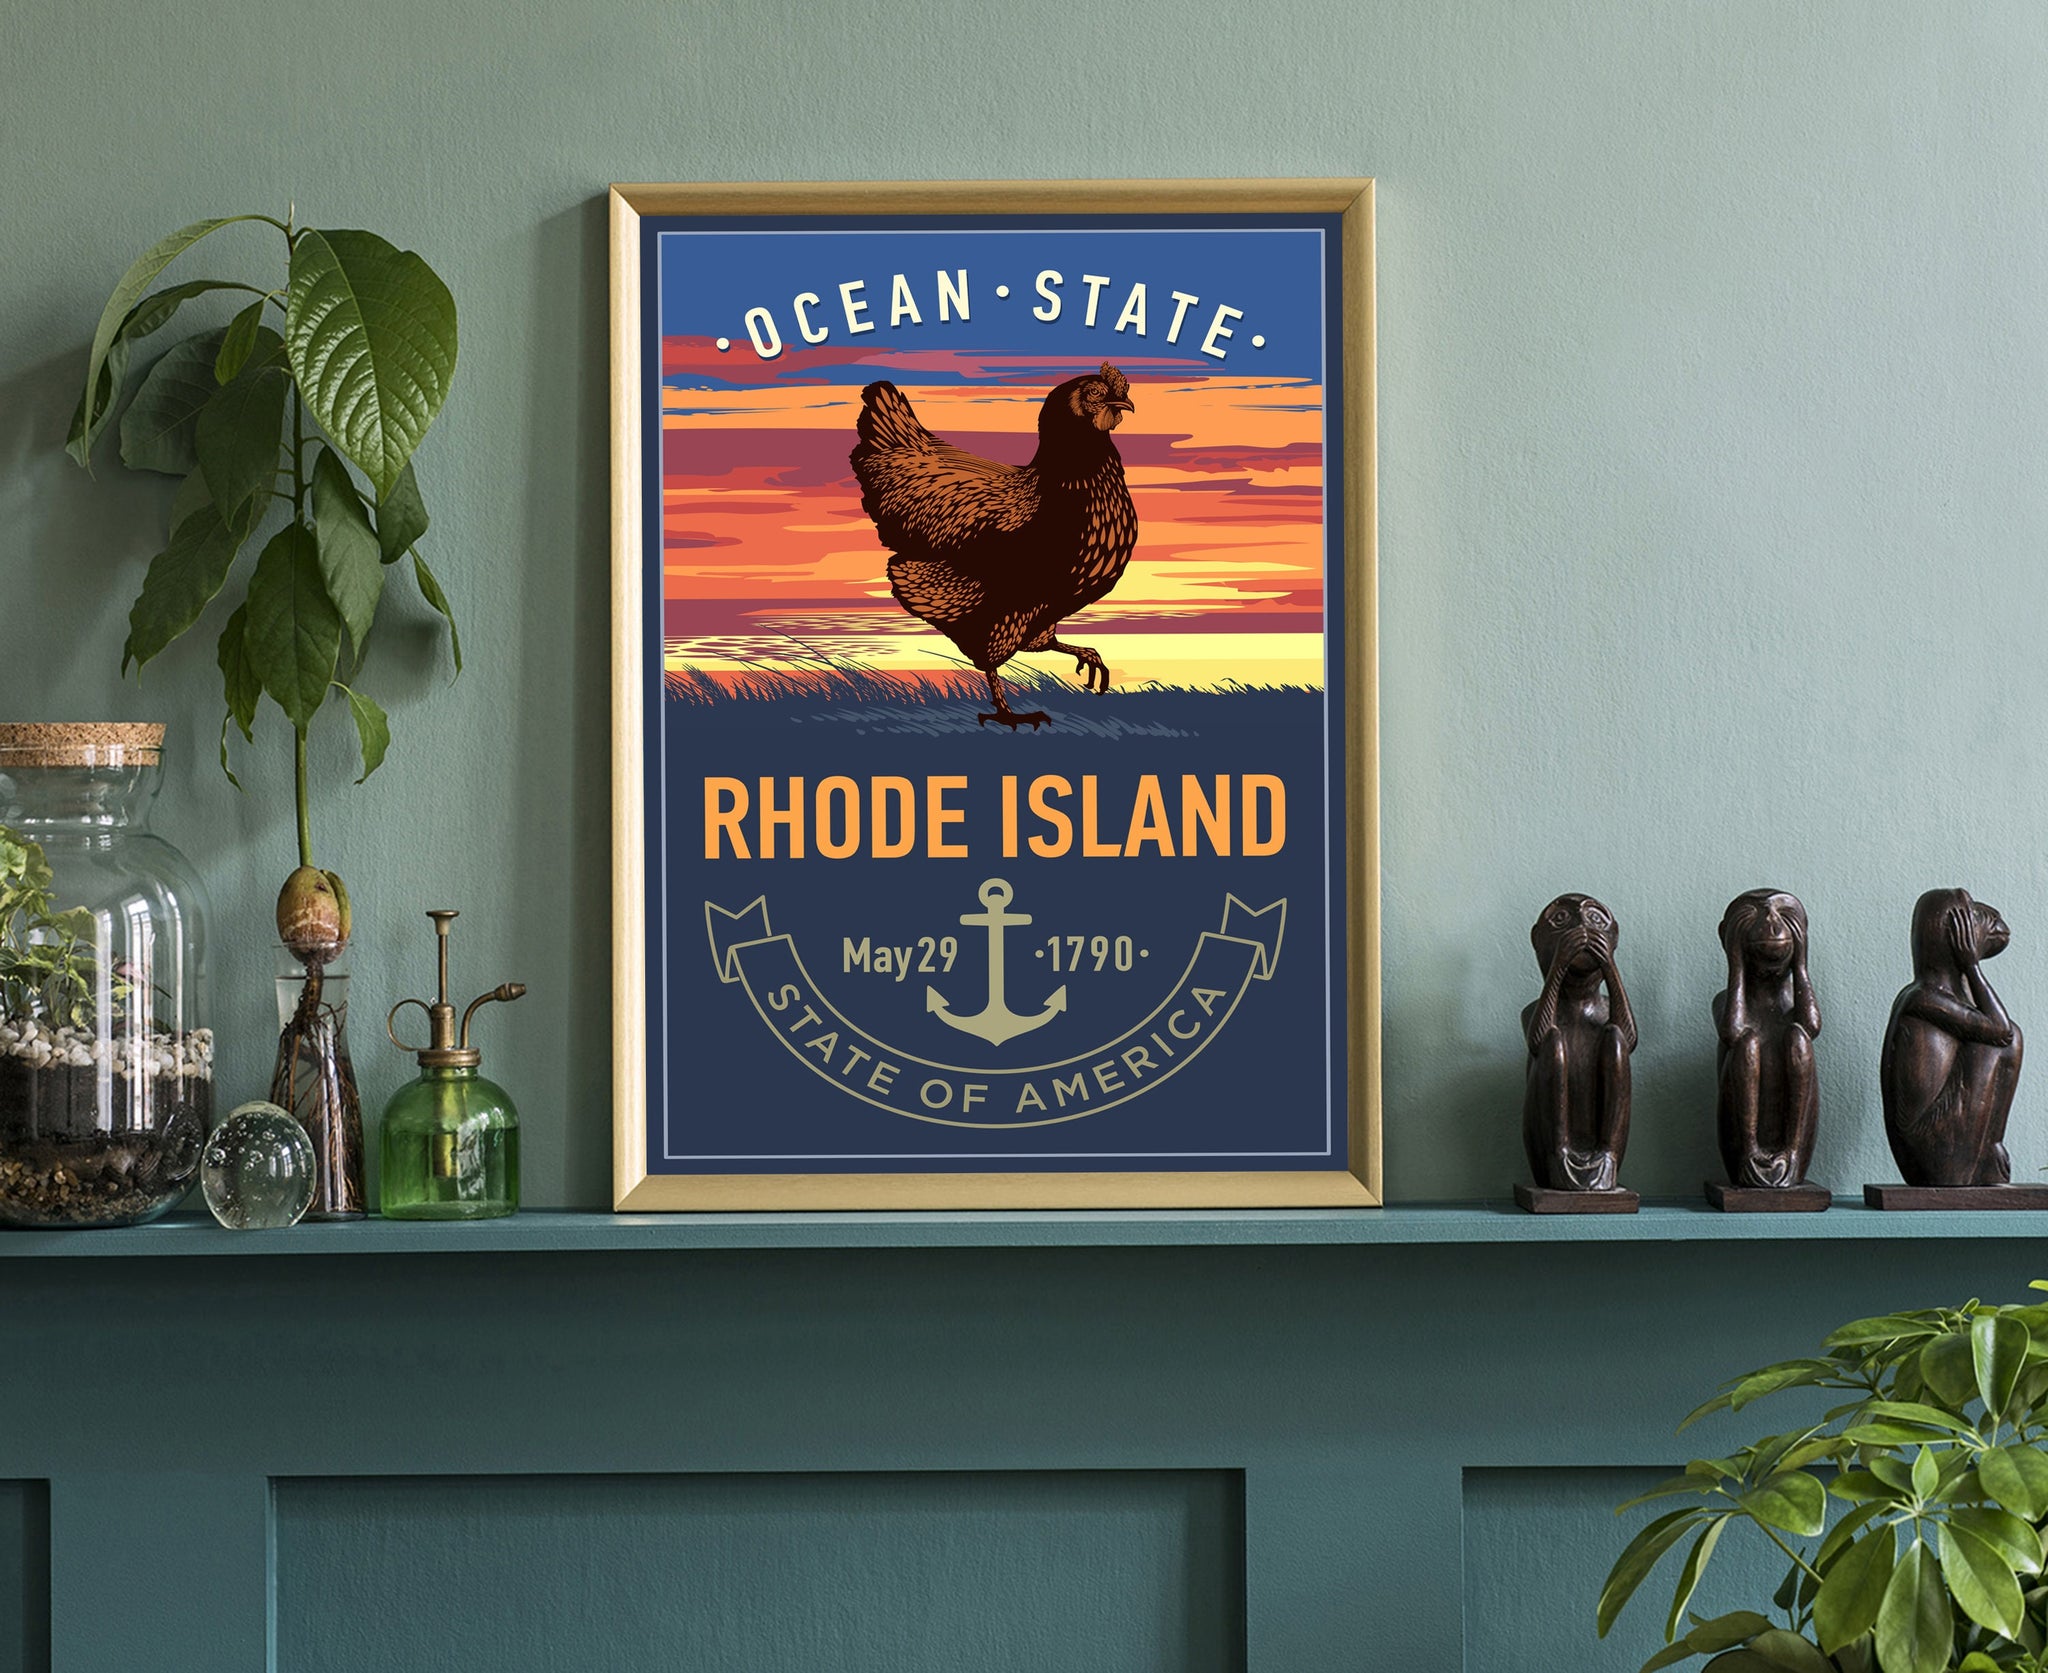 United States Poster, Rhode Island State Poster Print, Rhode Island State Emblem Poster, Retro Travel State Poster, Home Office Wall Art